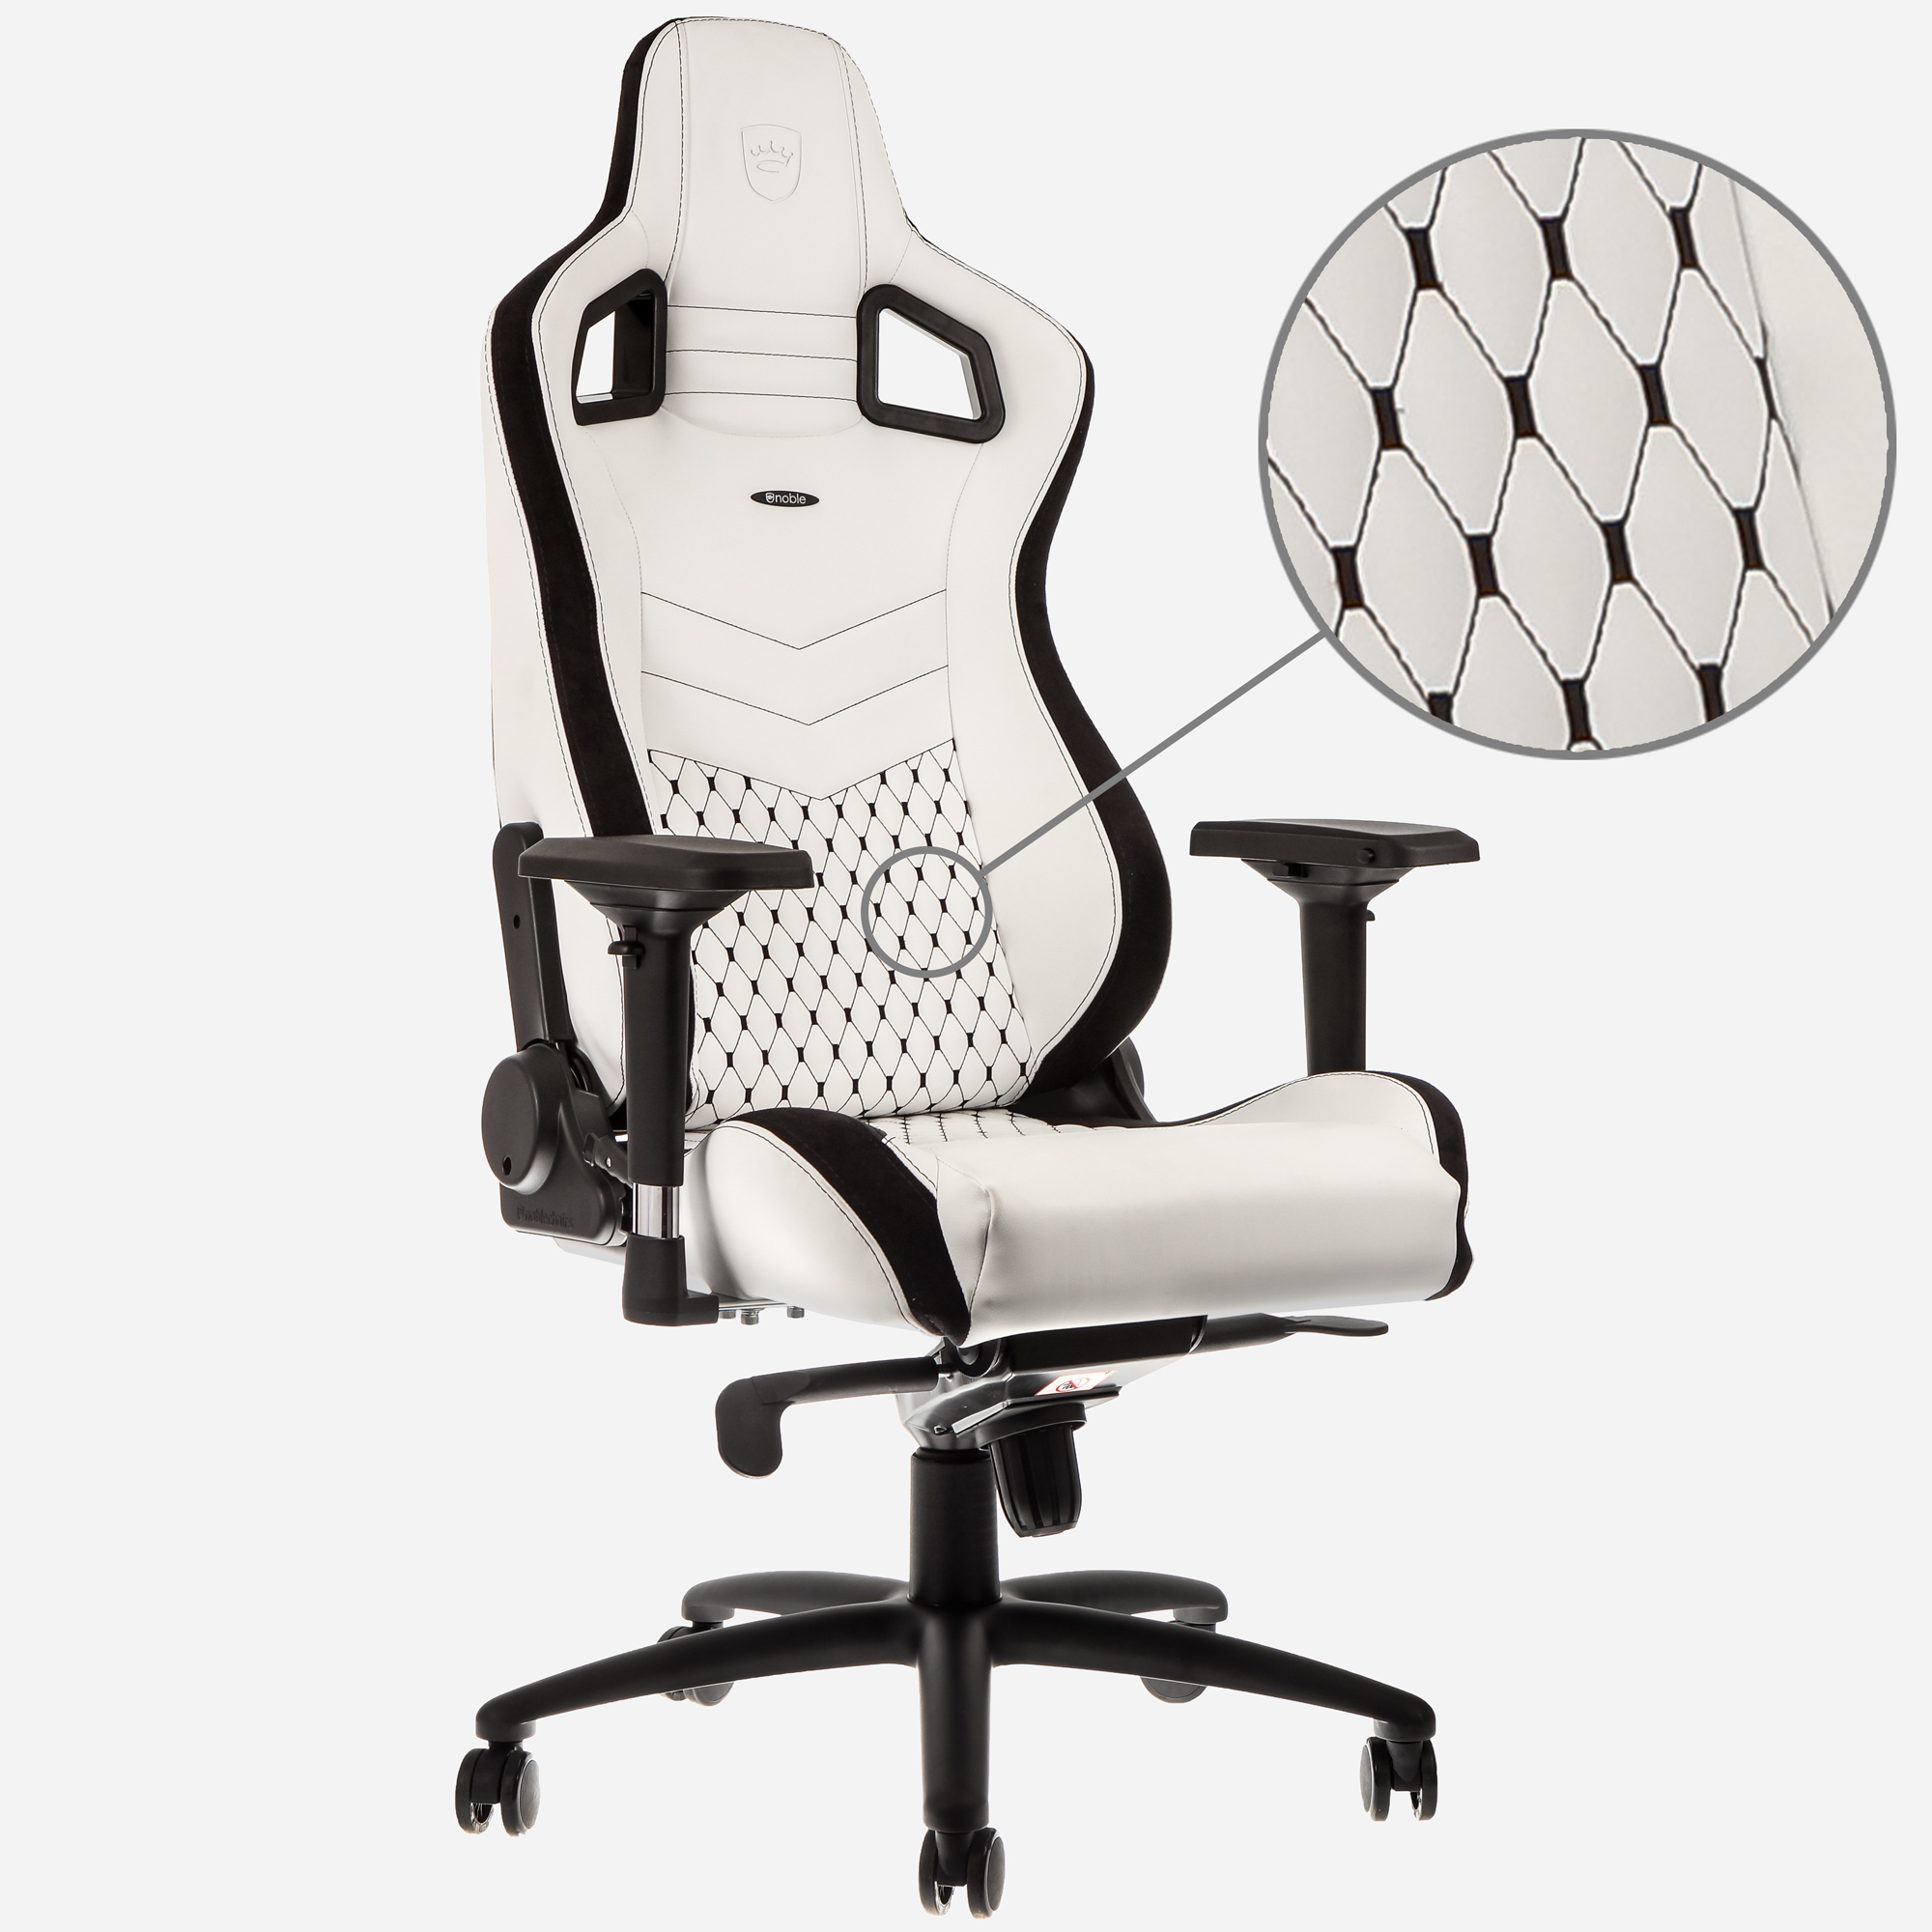 noblechairs - Cadeira noblechairs EPIC PU Leather Branco / Preto